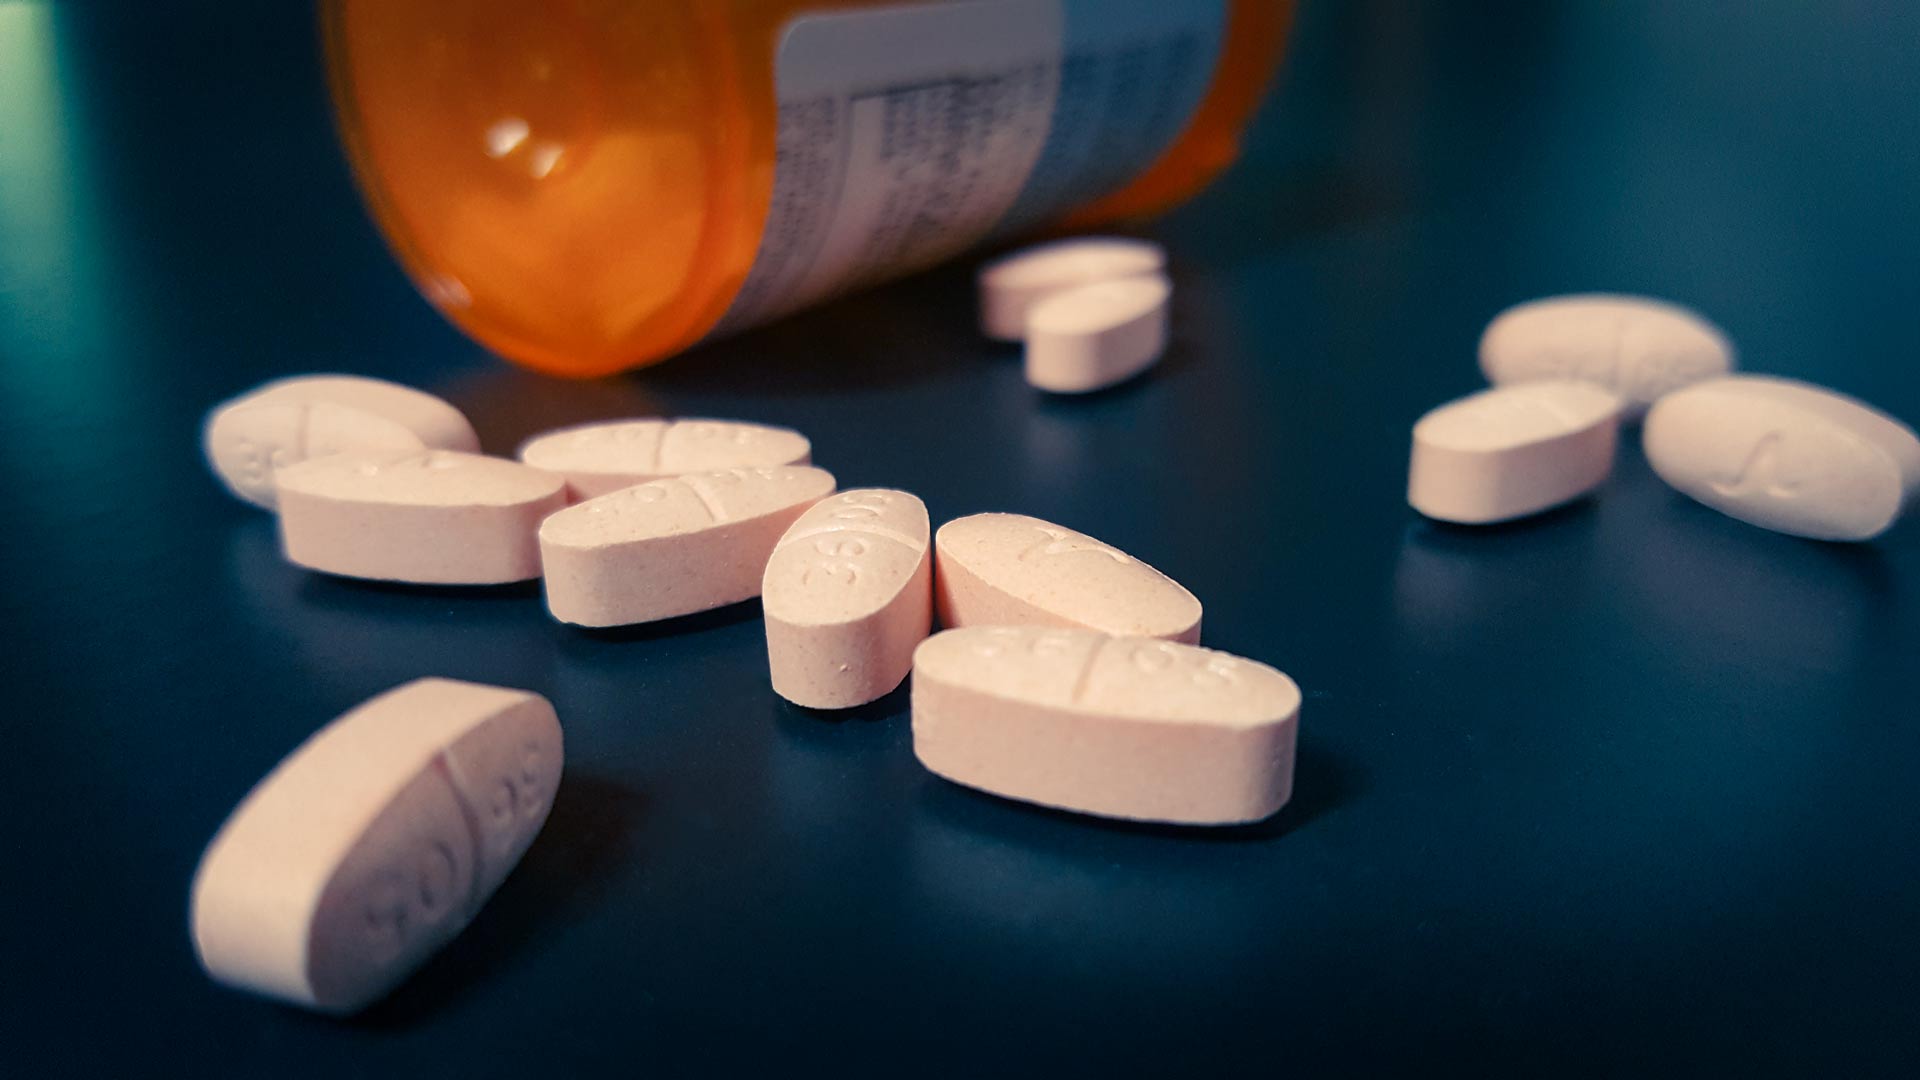 Many people rely on opioids to manage chronic pain.